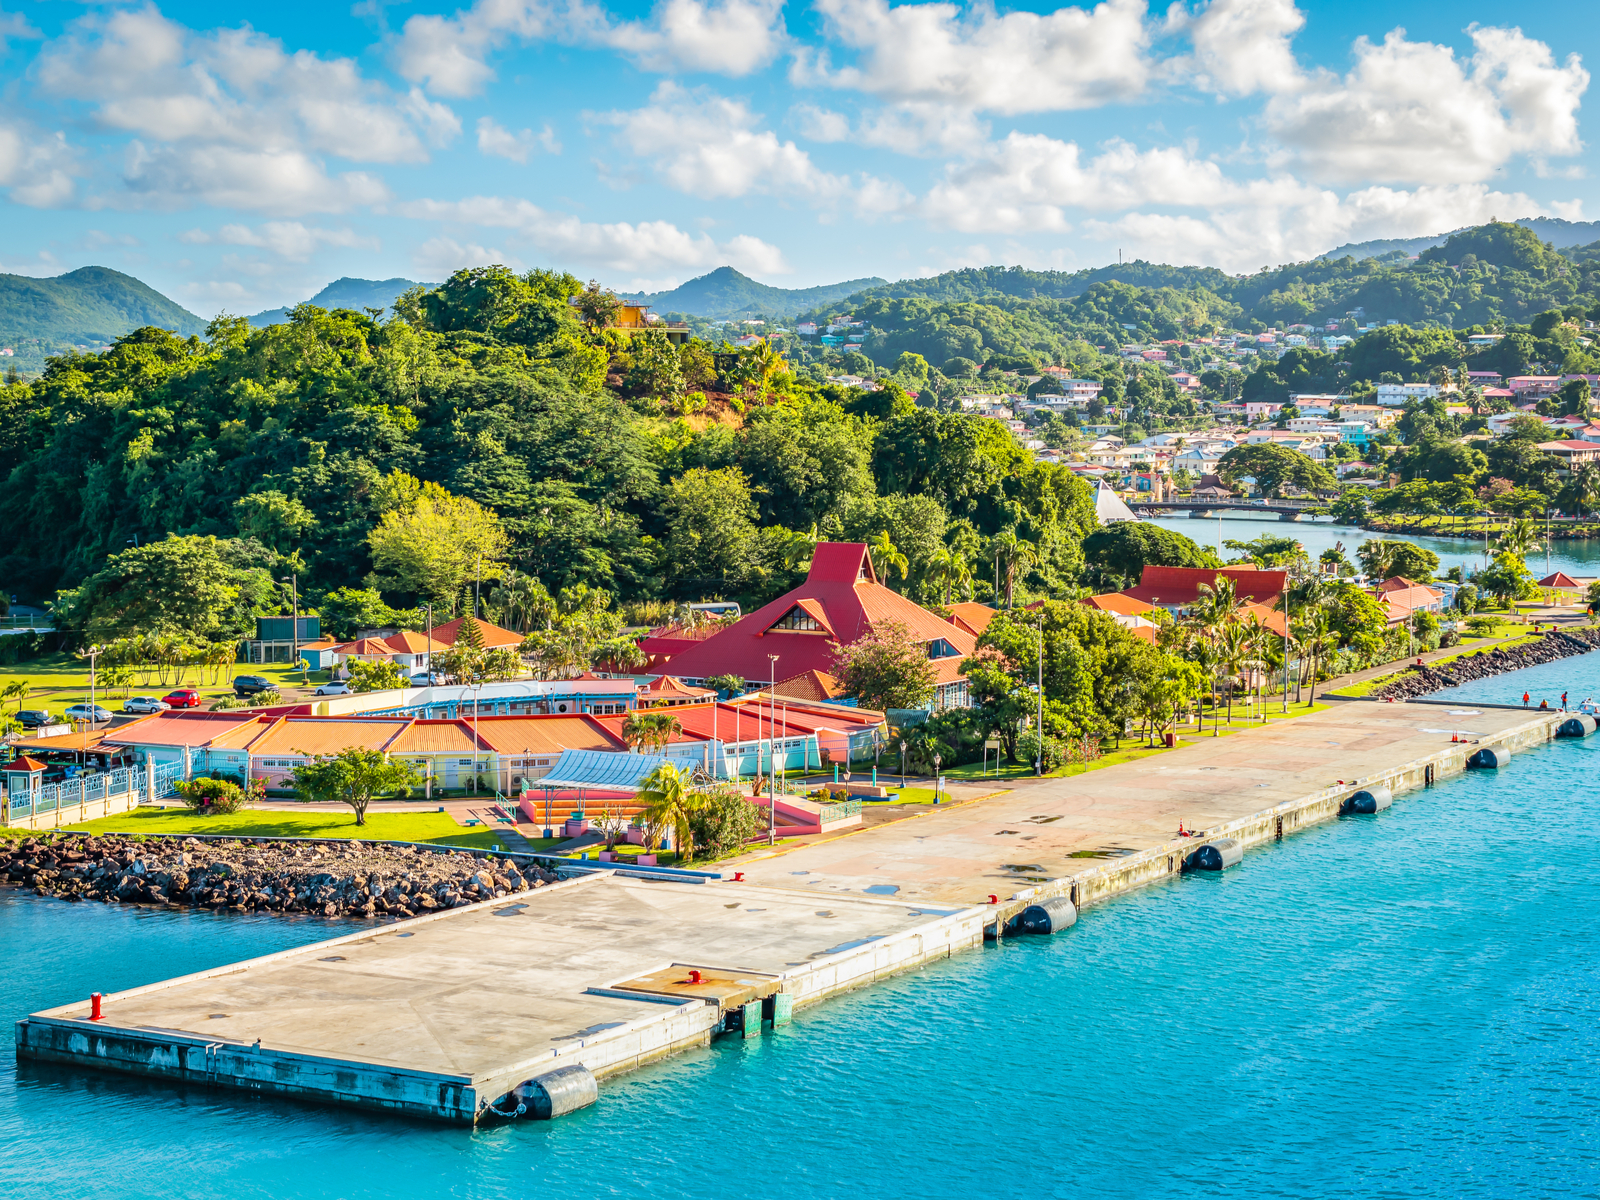 One of the best Saint Lucia resorts pictured on the side of a hill